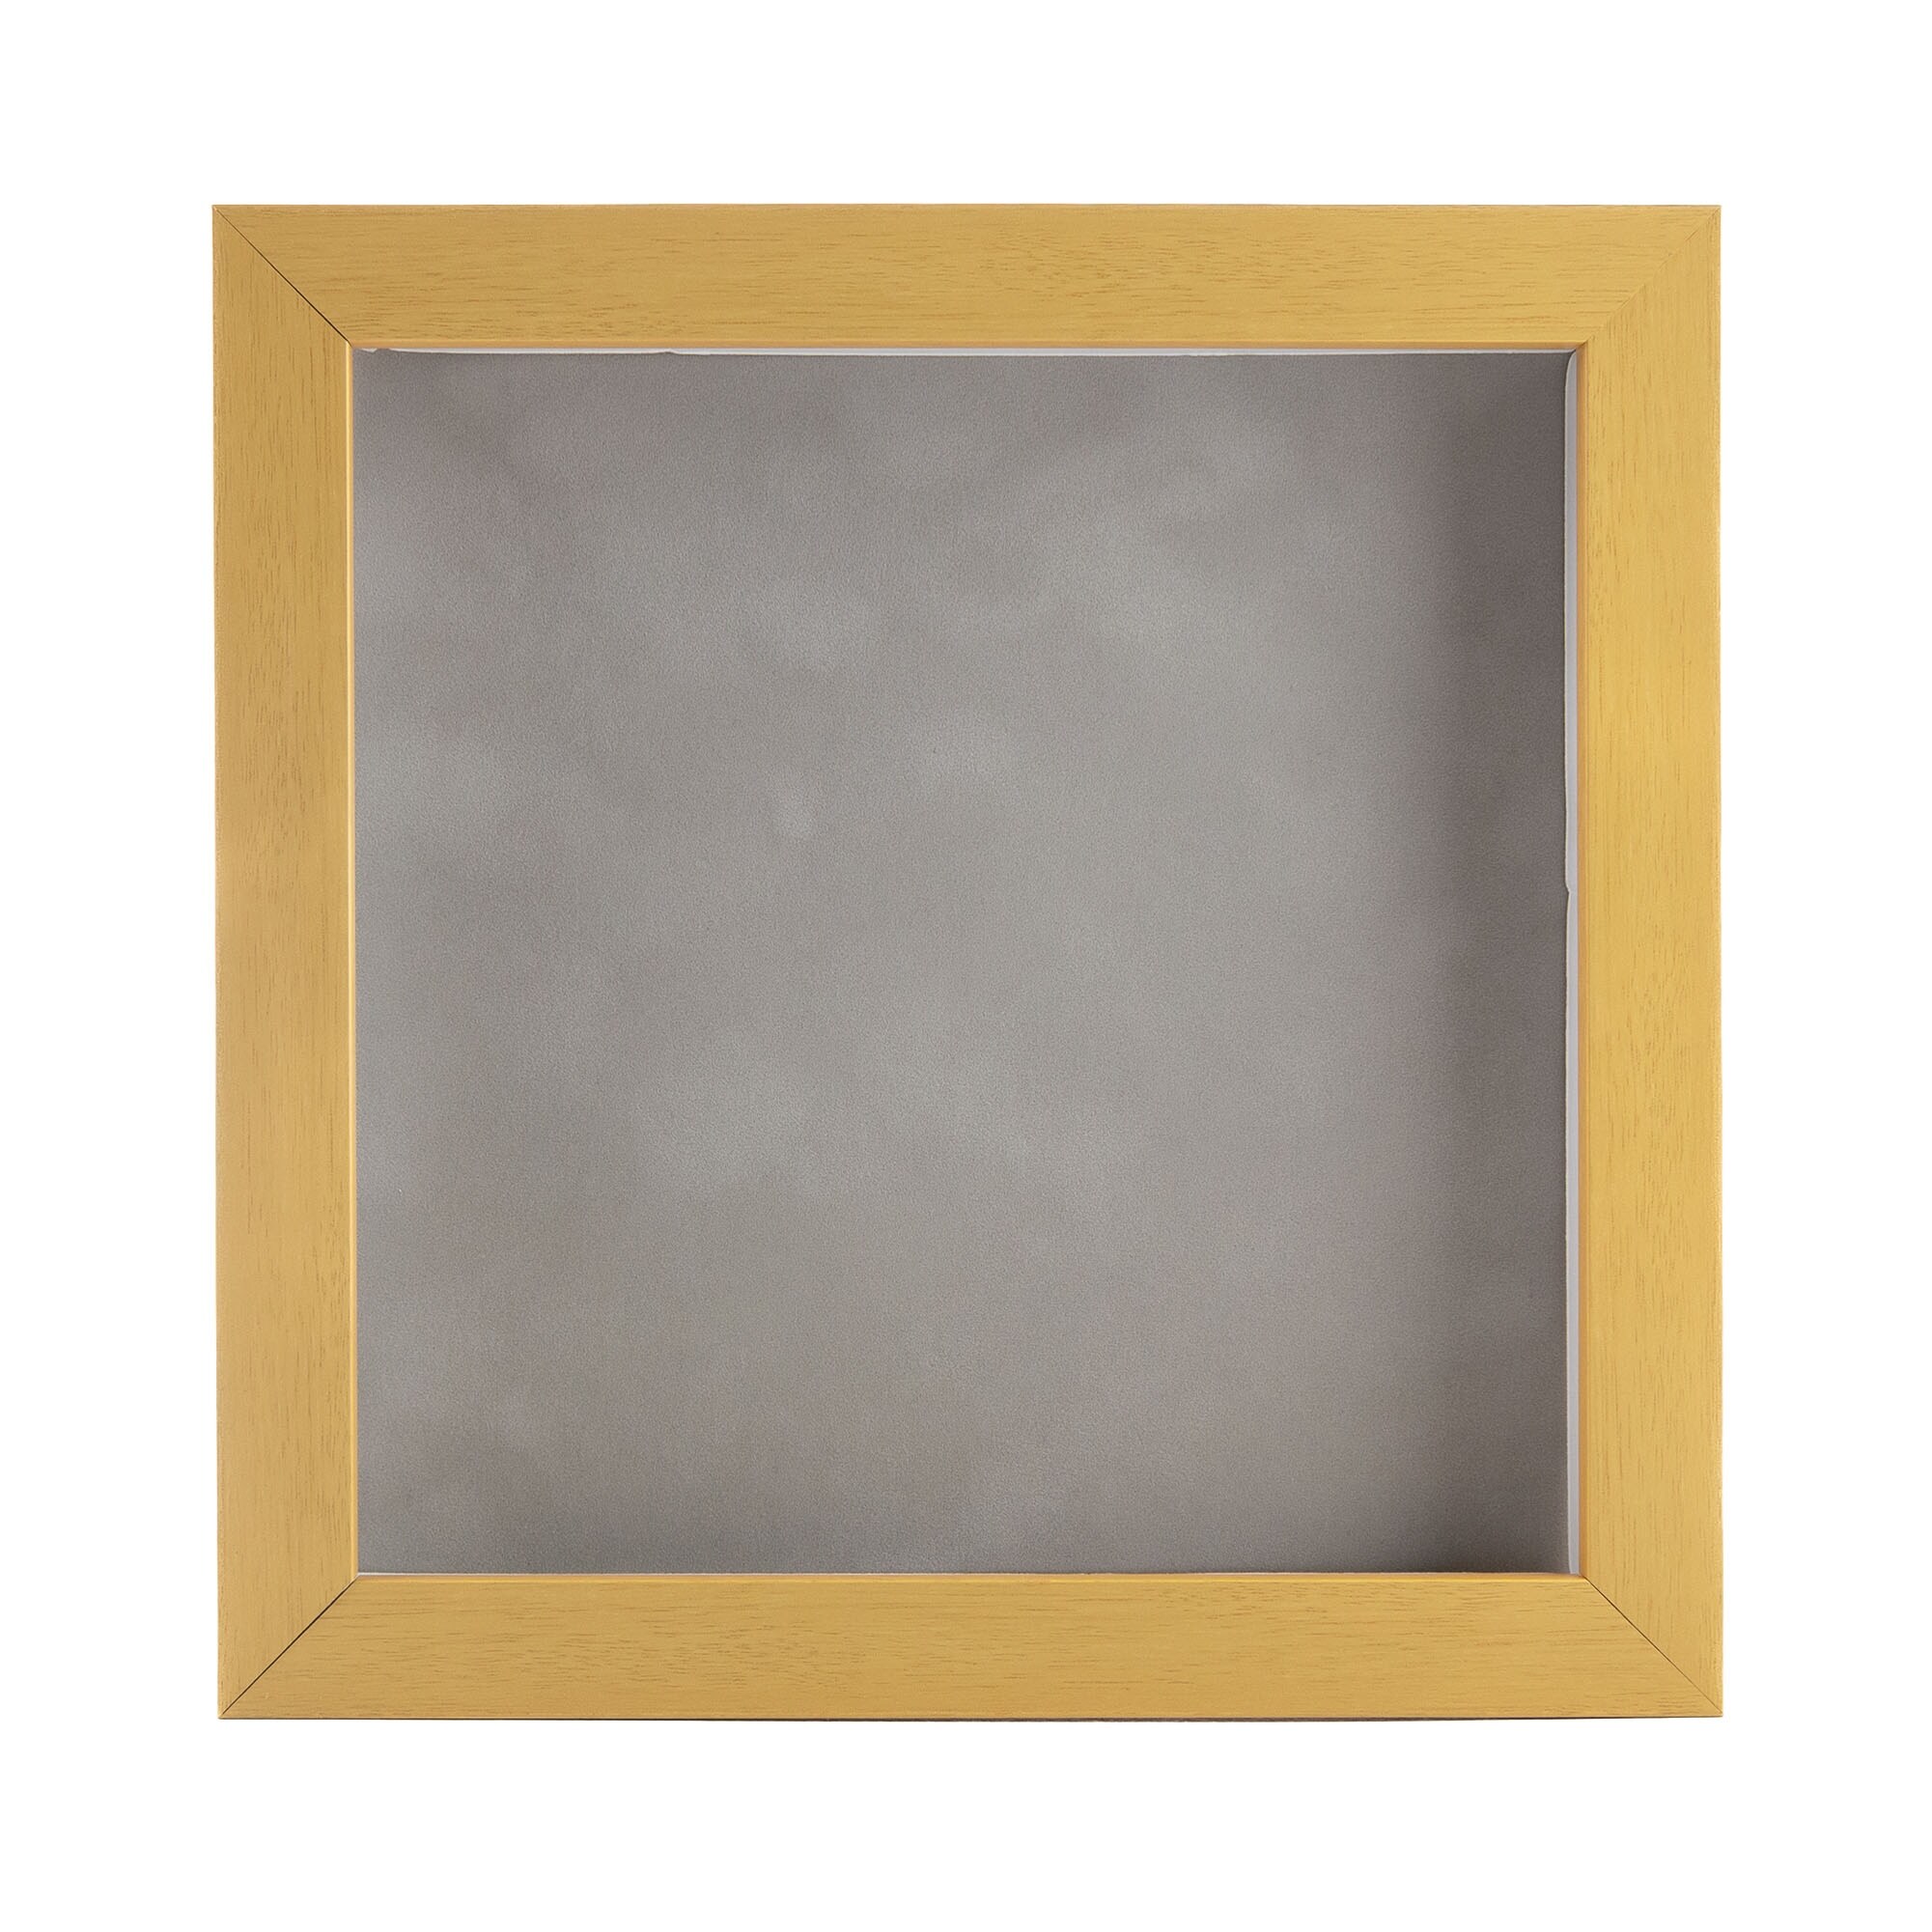  30x30 Shadow Box Frame Dark Gray Finish, 1 Depth of Usable  Space, Vertical or Horizontal Display, Interior Size 30x30 Inches, UV  Resistant Acrylic, Acid-Free Backing, Wall Hangers